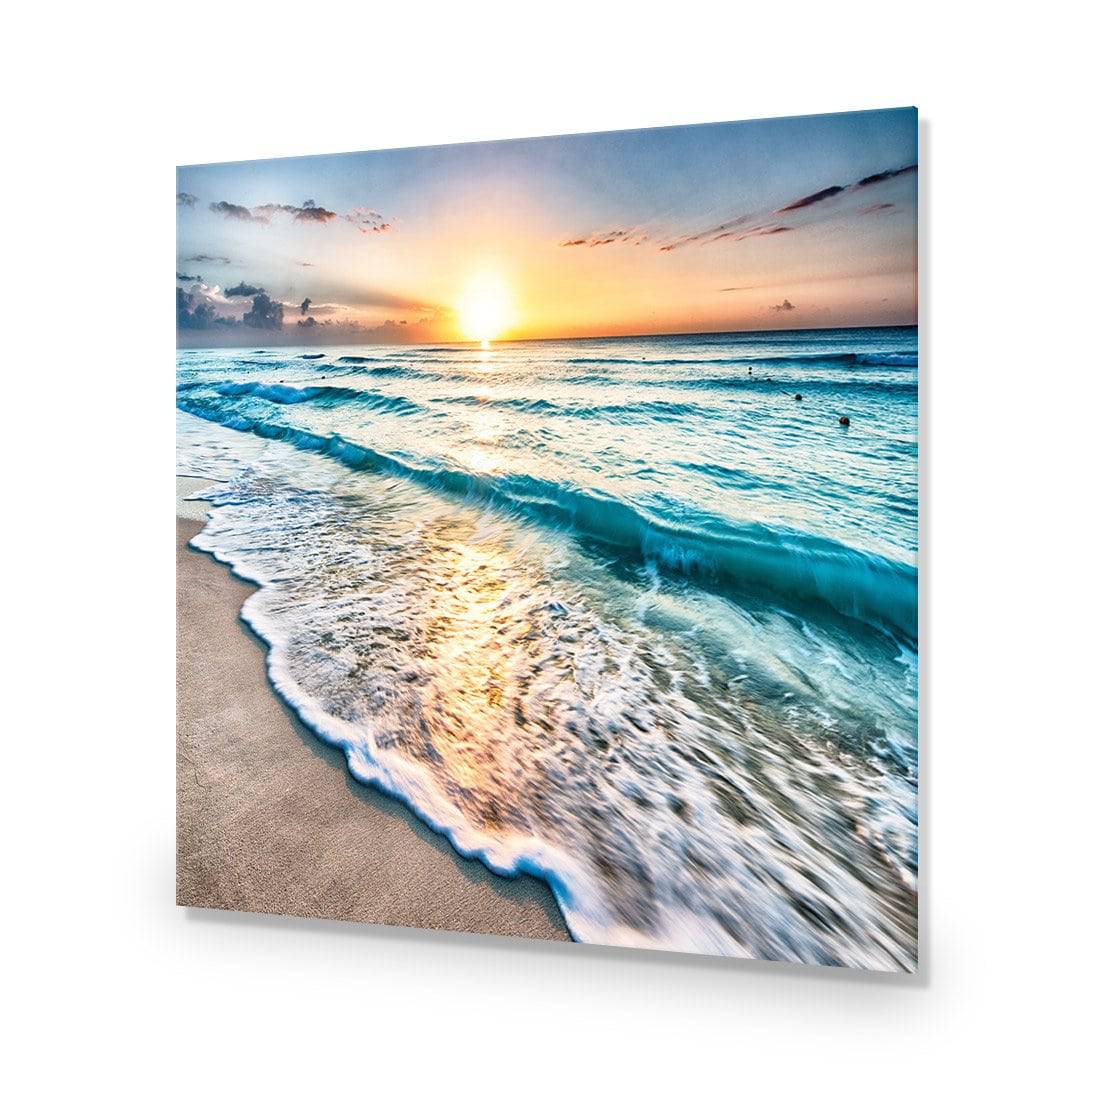 Glimmering Sunrise, Square-Acrylic-Wall Art Design-Without Border-Acrylic - No Frame-37x37cm-Wall Art Designs